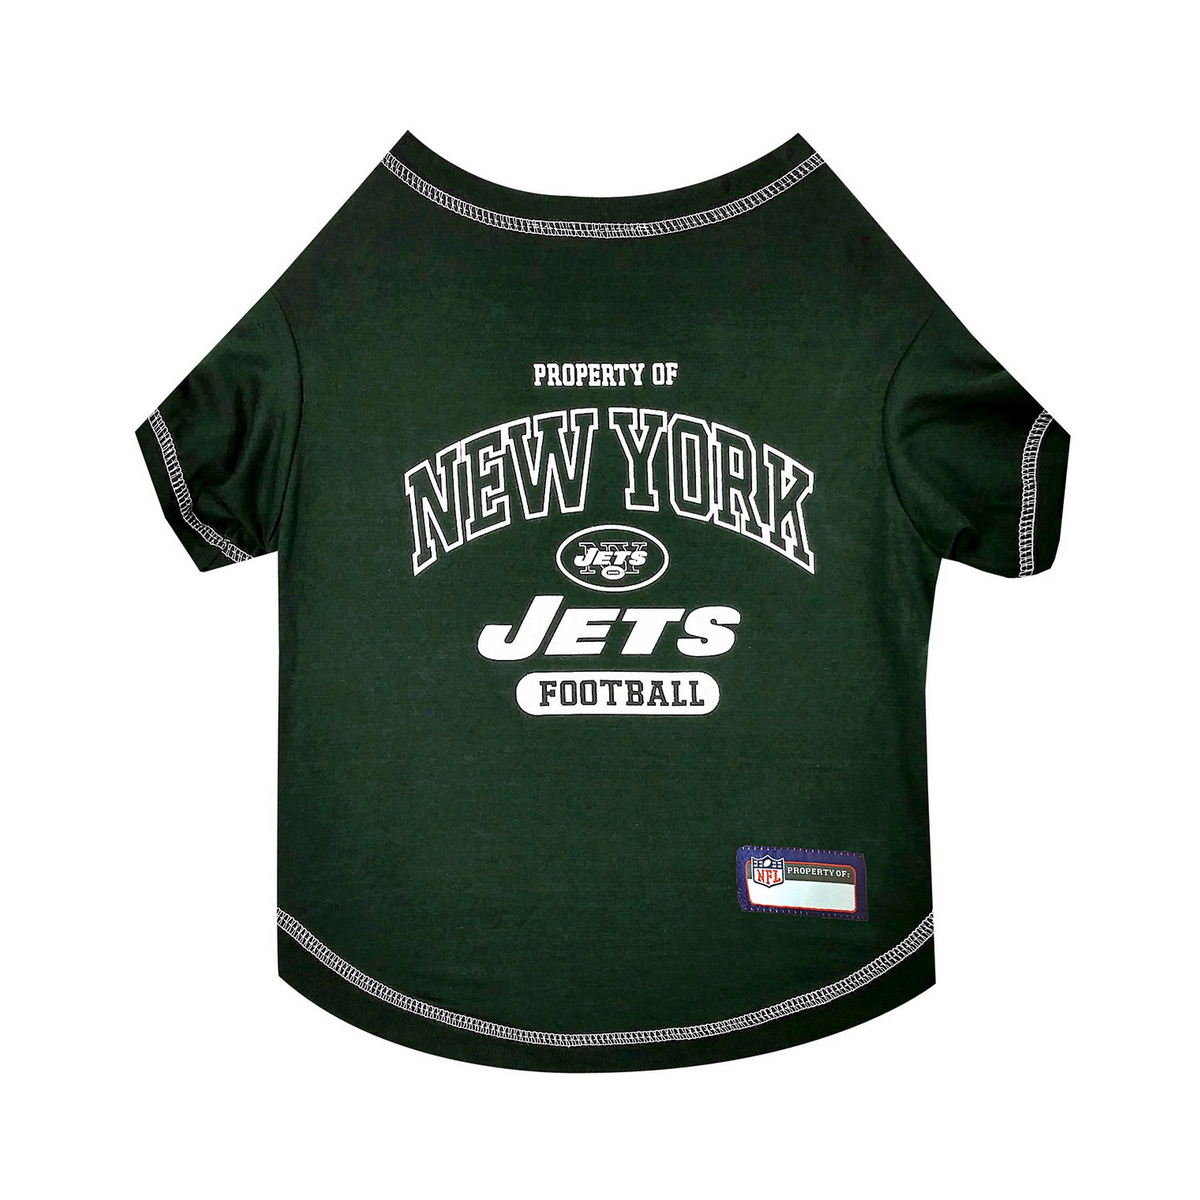 New York Jets Athletics Tee Shirt - 3 Red Rovers